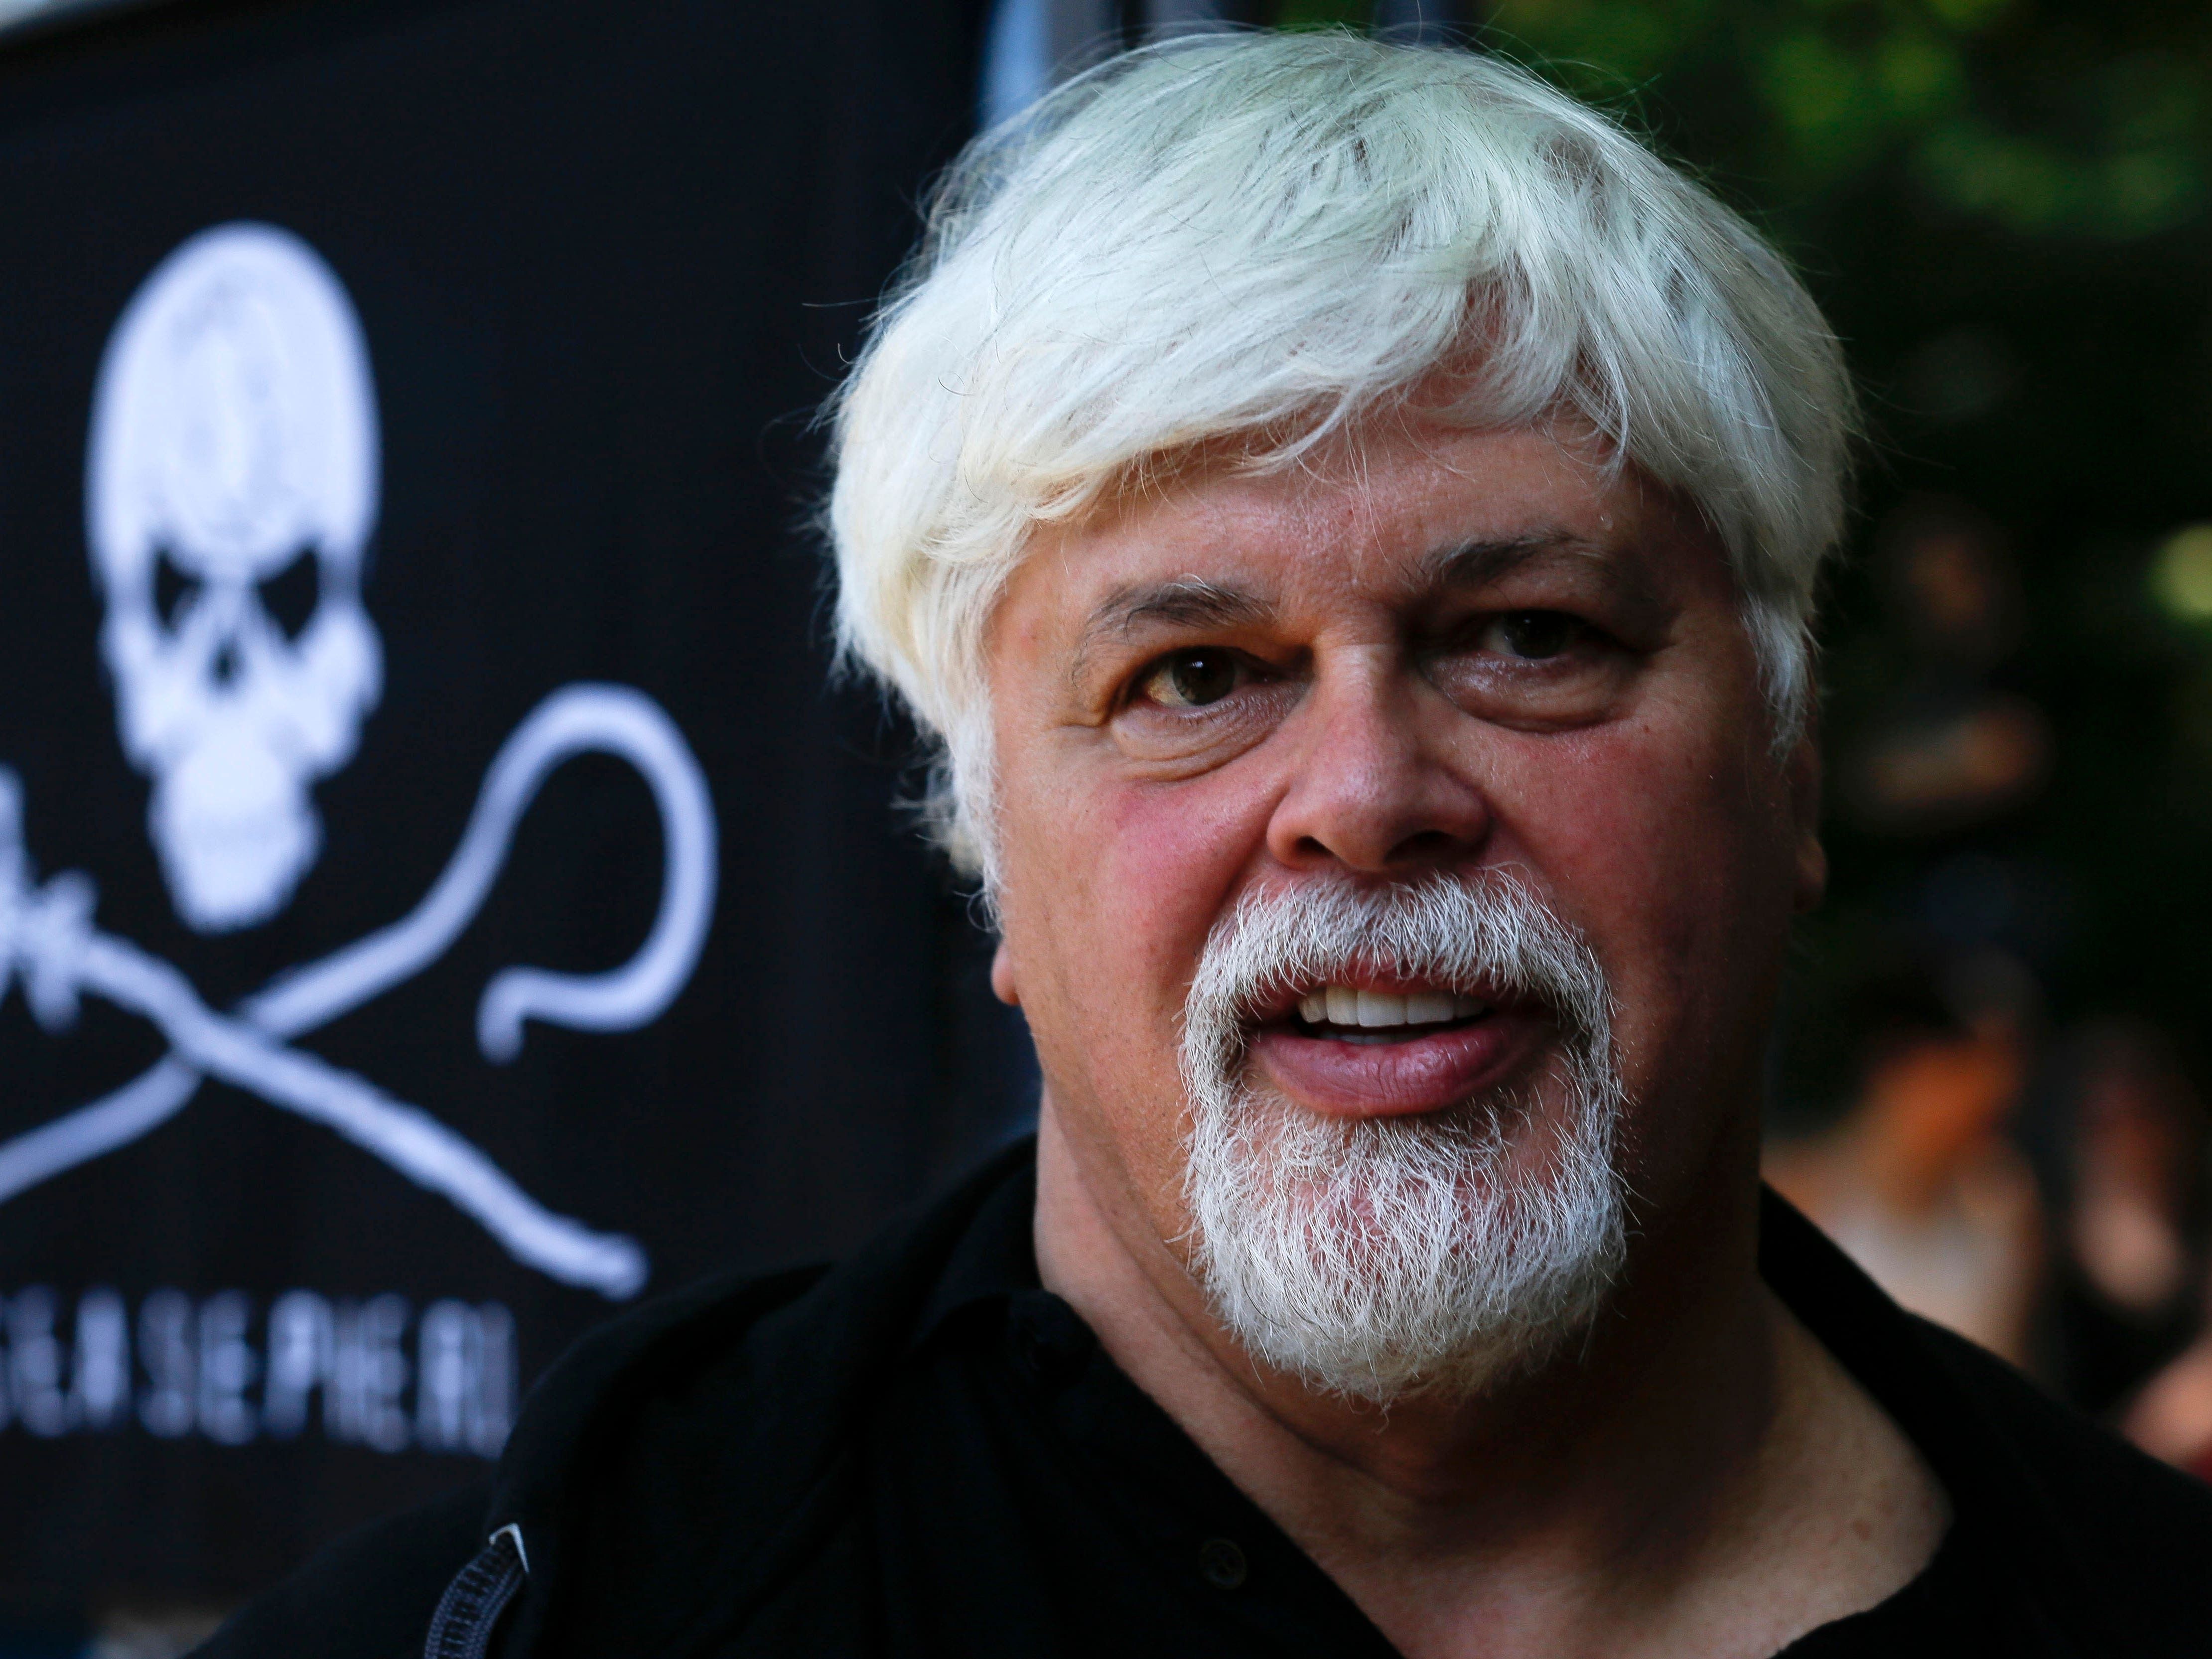 Anti-whaling campaigner Paul Watson arrested in Greenland